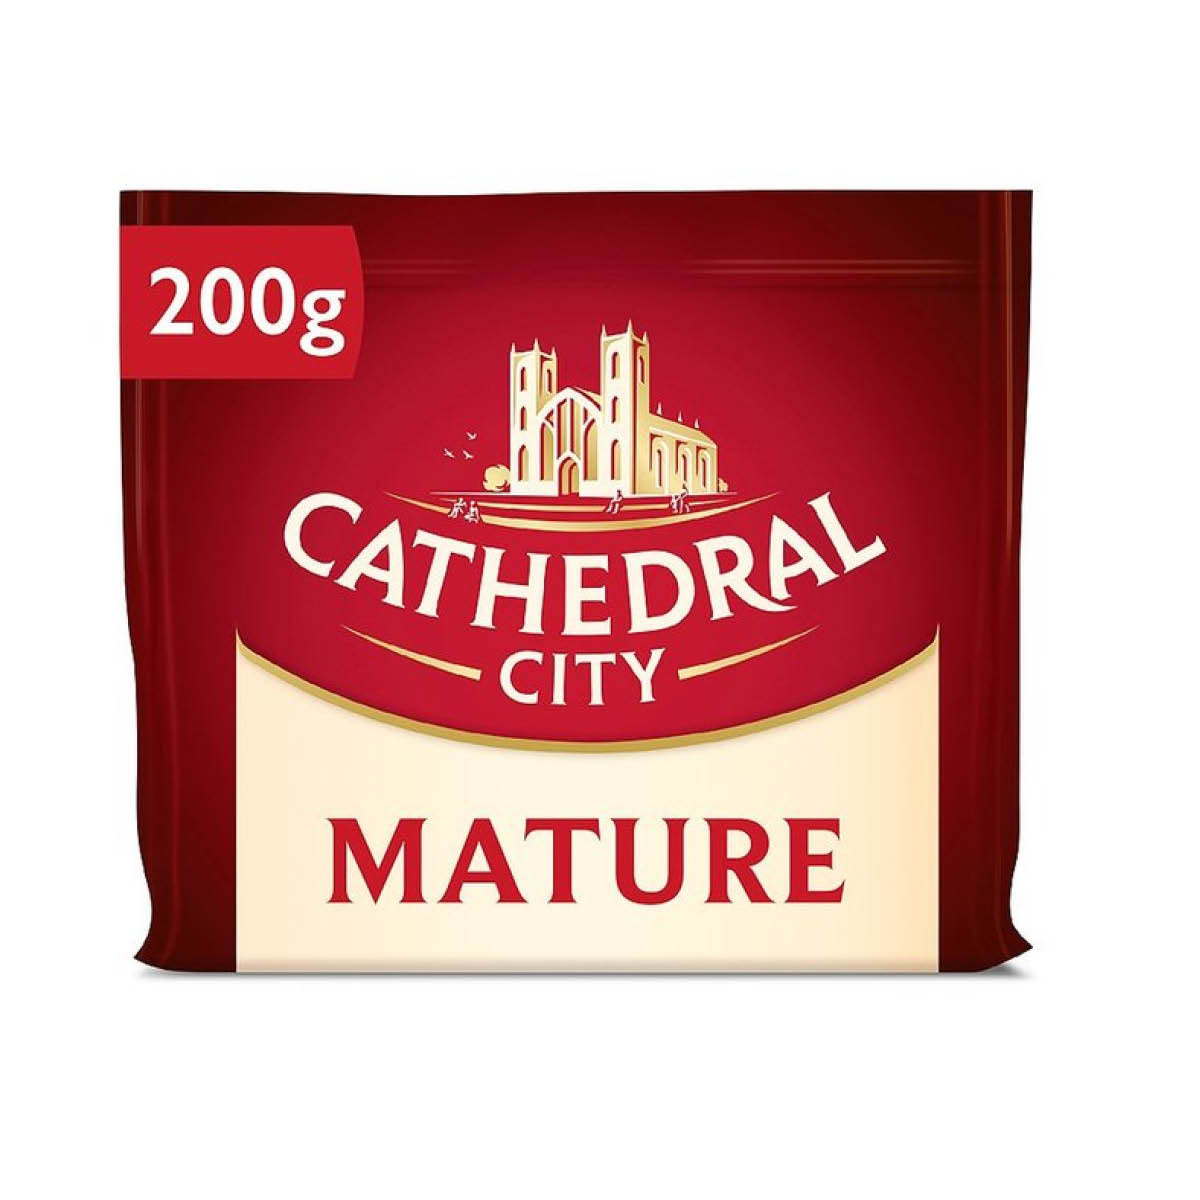 Cathedral City Mature Cheddar, 200g